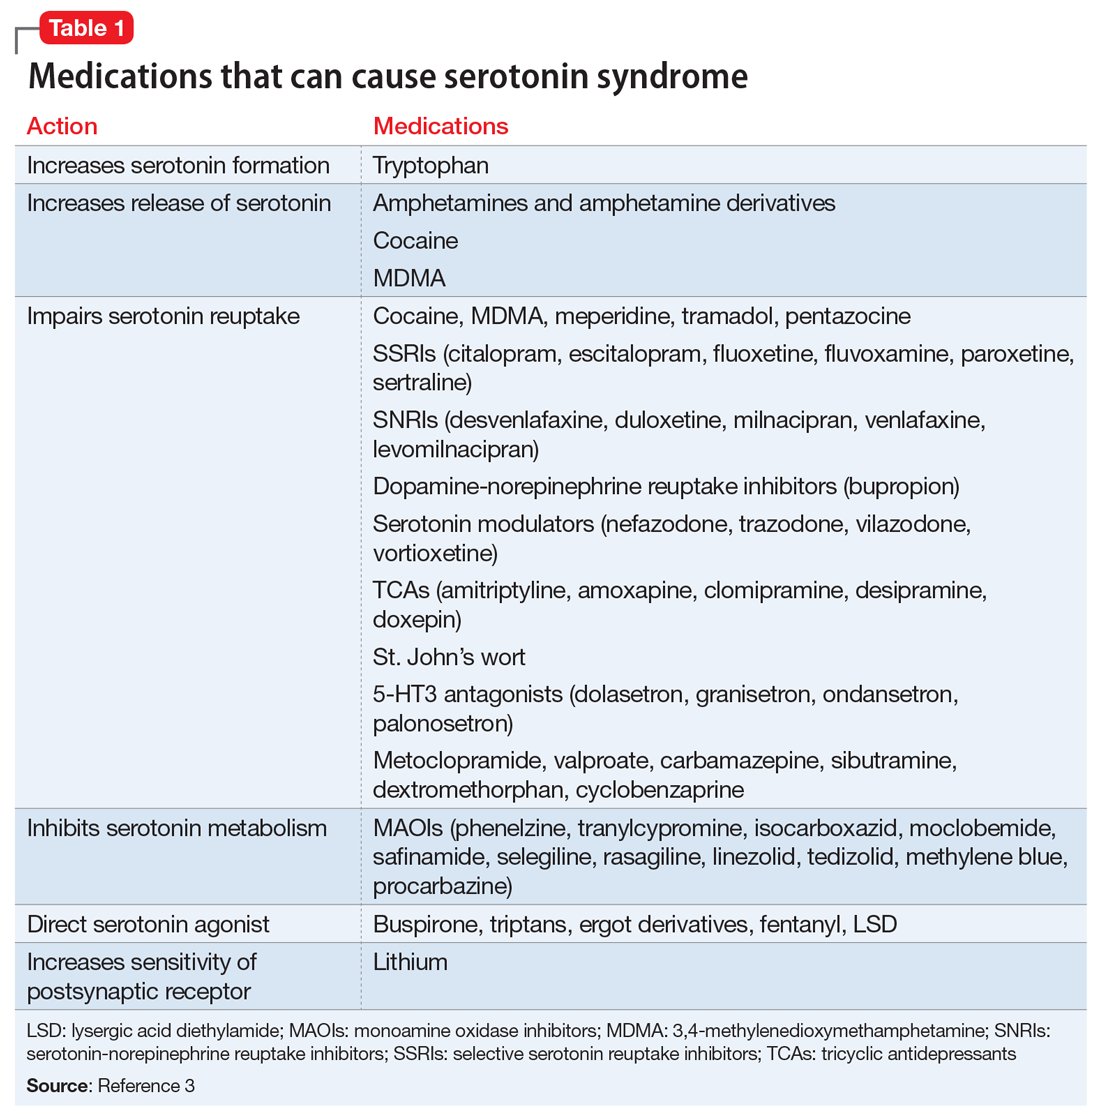 Medications that can cause serotonin syndrome